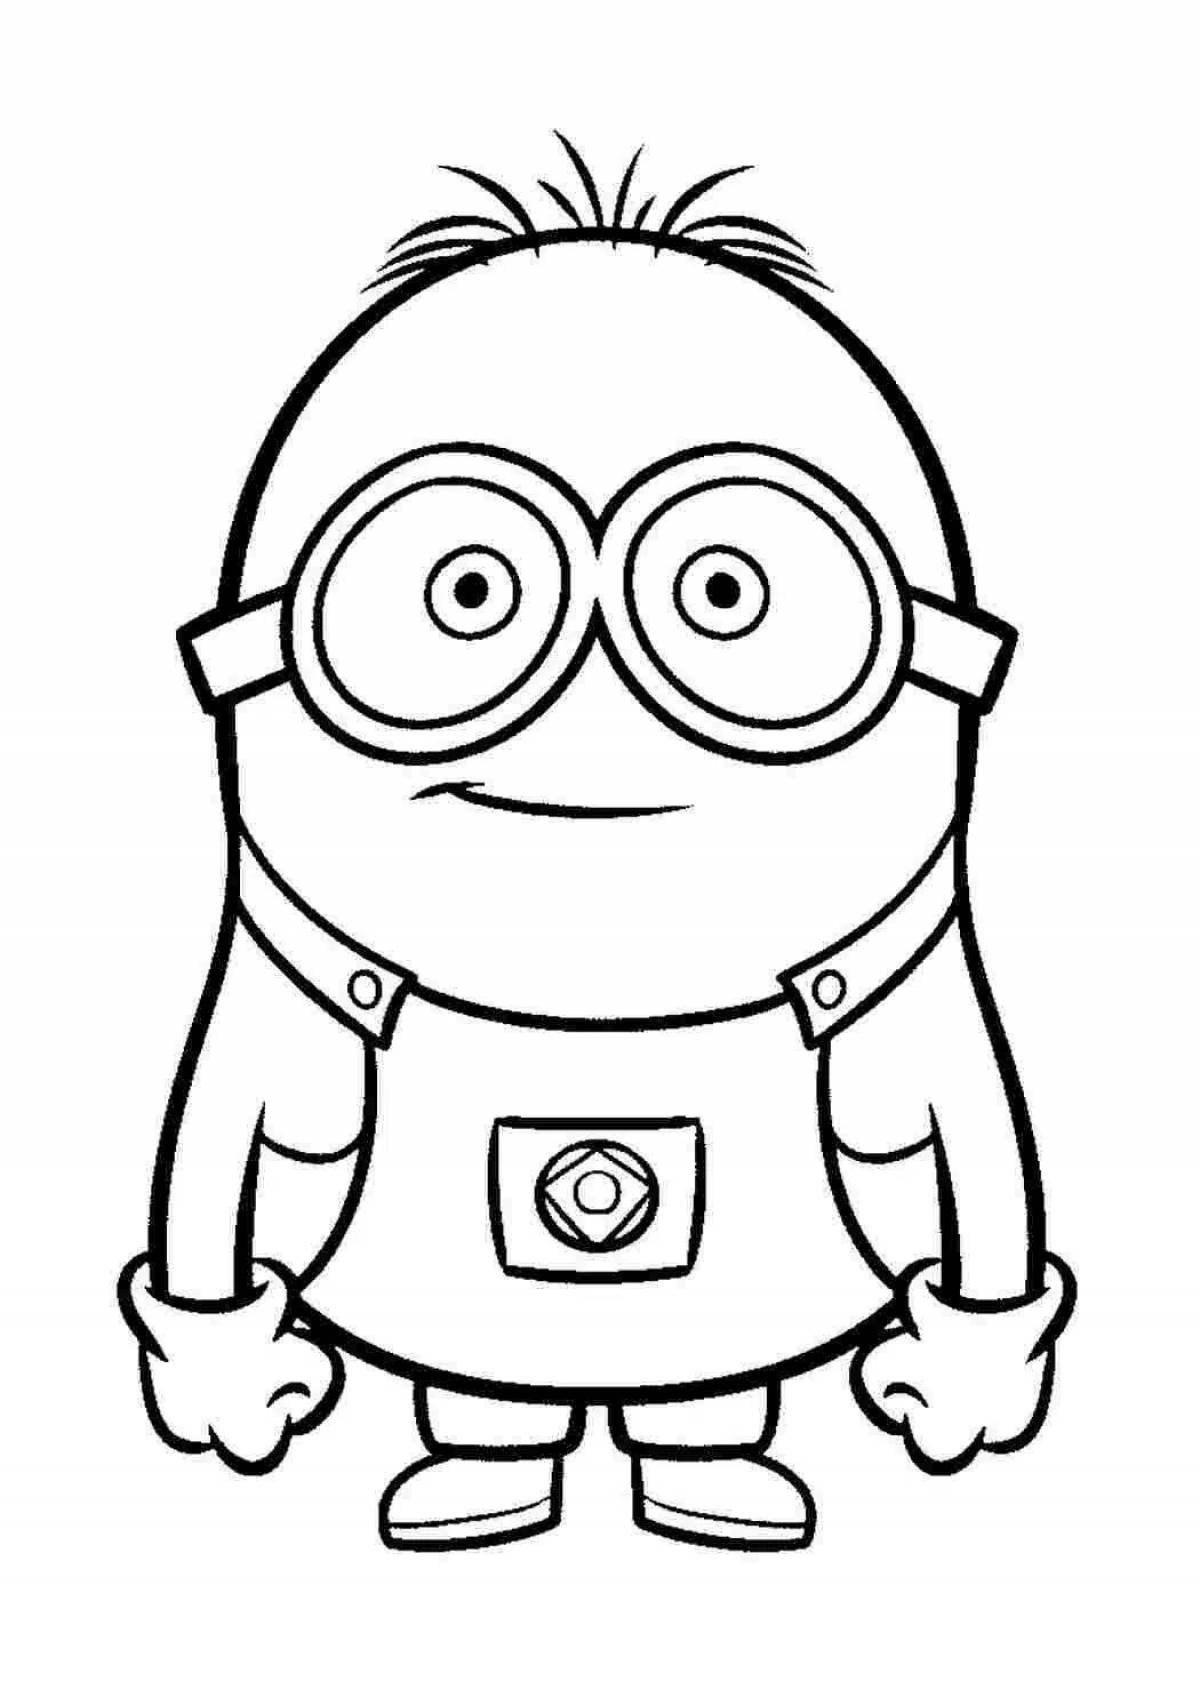 Coloring playful kevin the minion